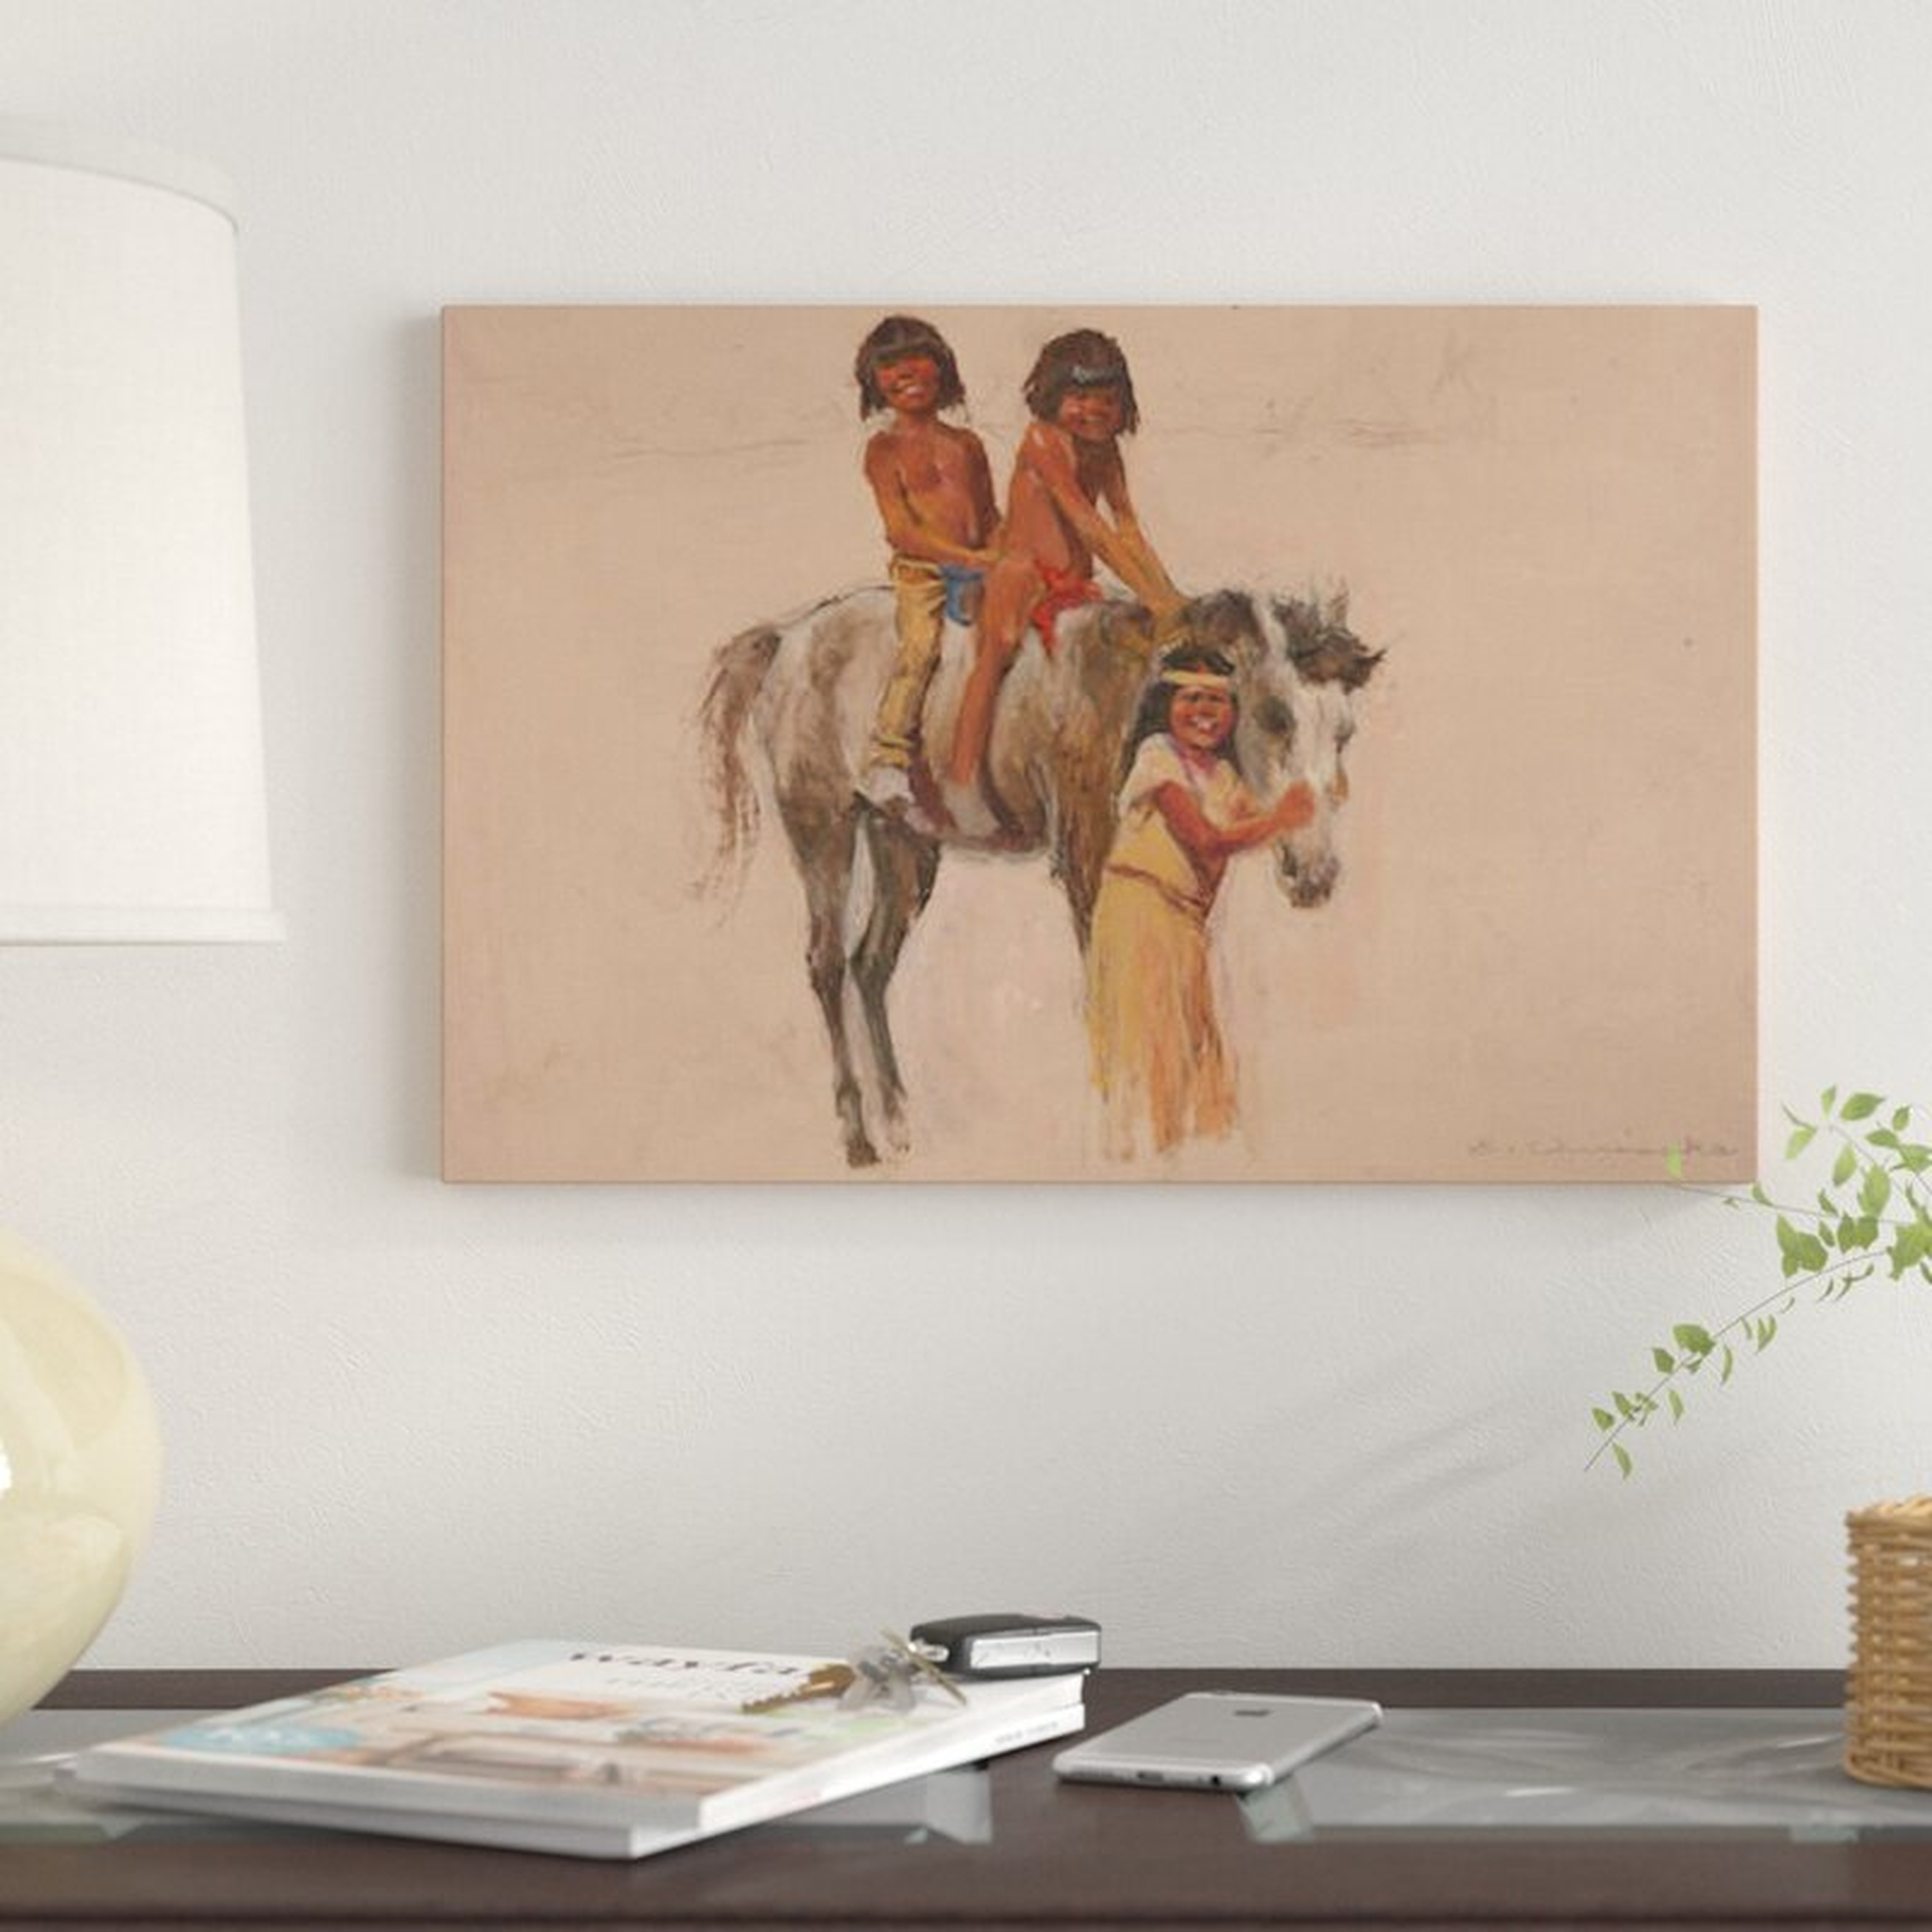 26" x 40" x 0.75" Brown/Gray 'Native American Children With Pony' by Ernest Chiriacka Graphic Art Print on Wrapped Canvas - Wayfair